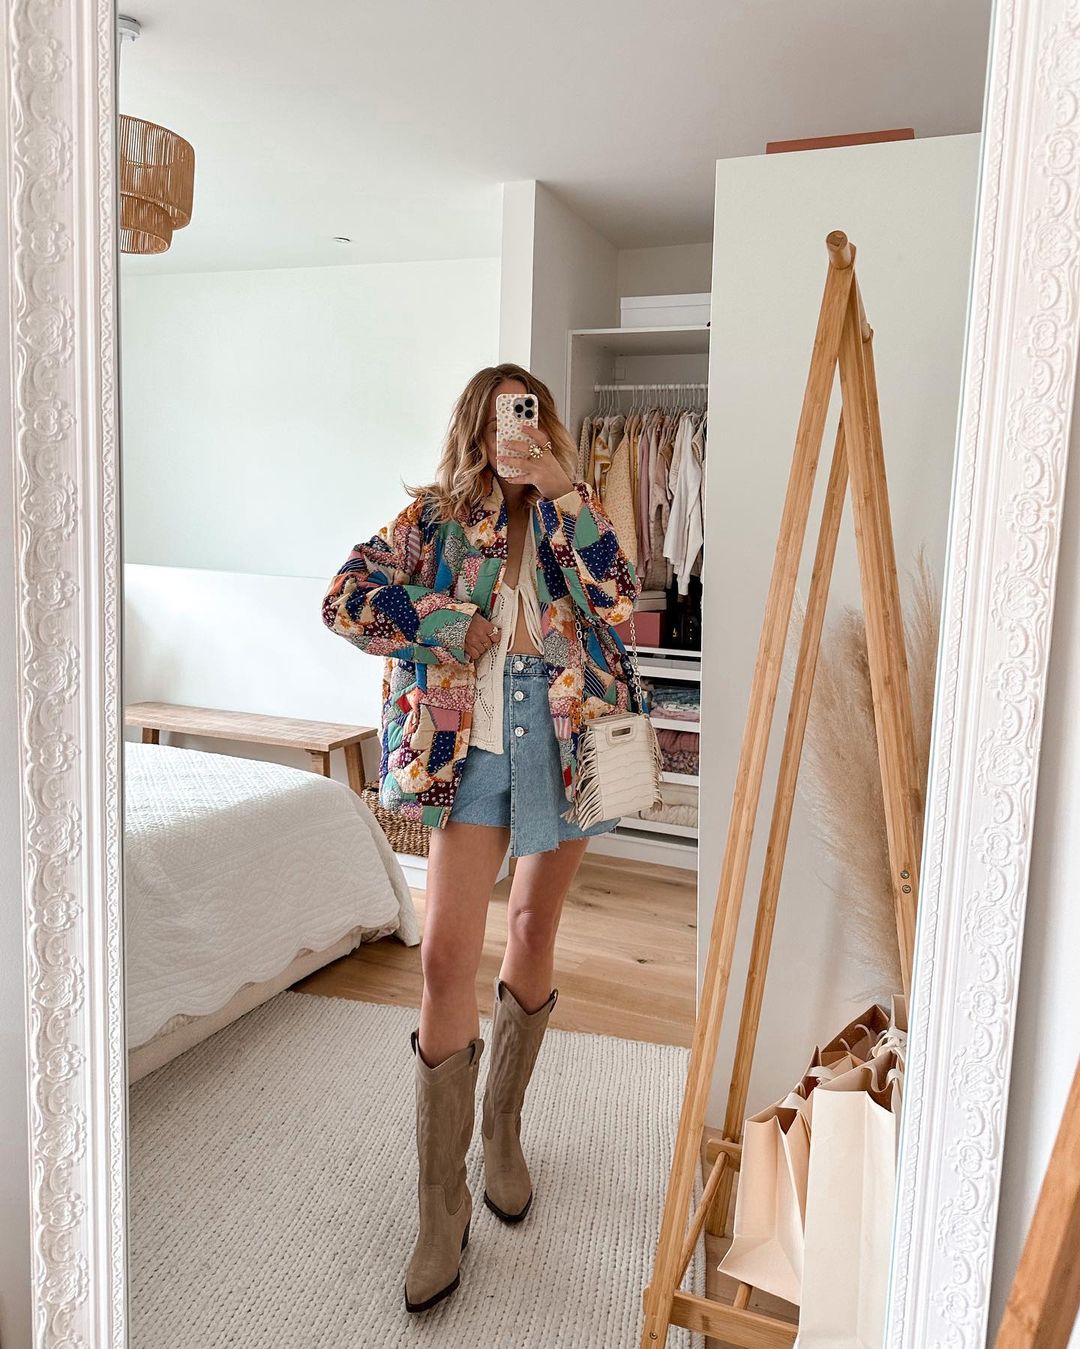 10 Looks That Define Summer’s Coastal Cowgirl Aesthetic